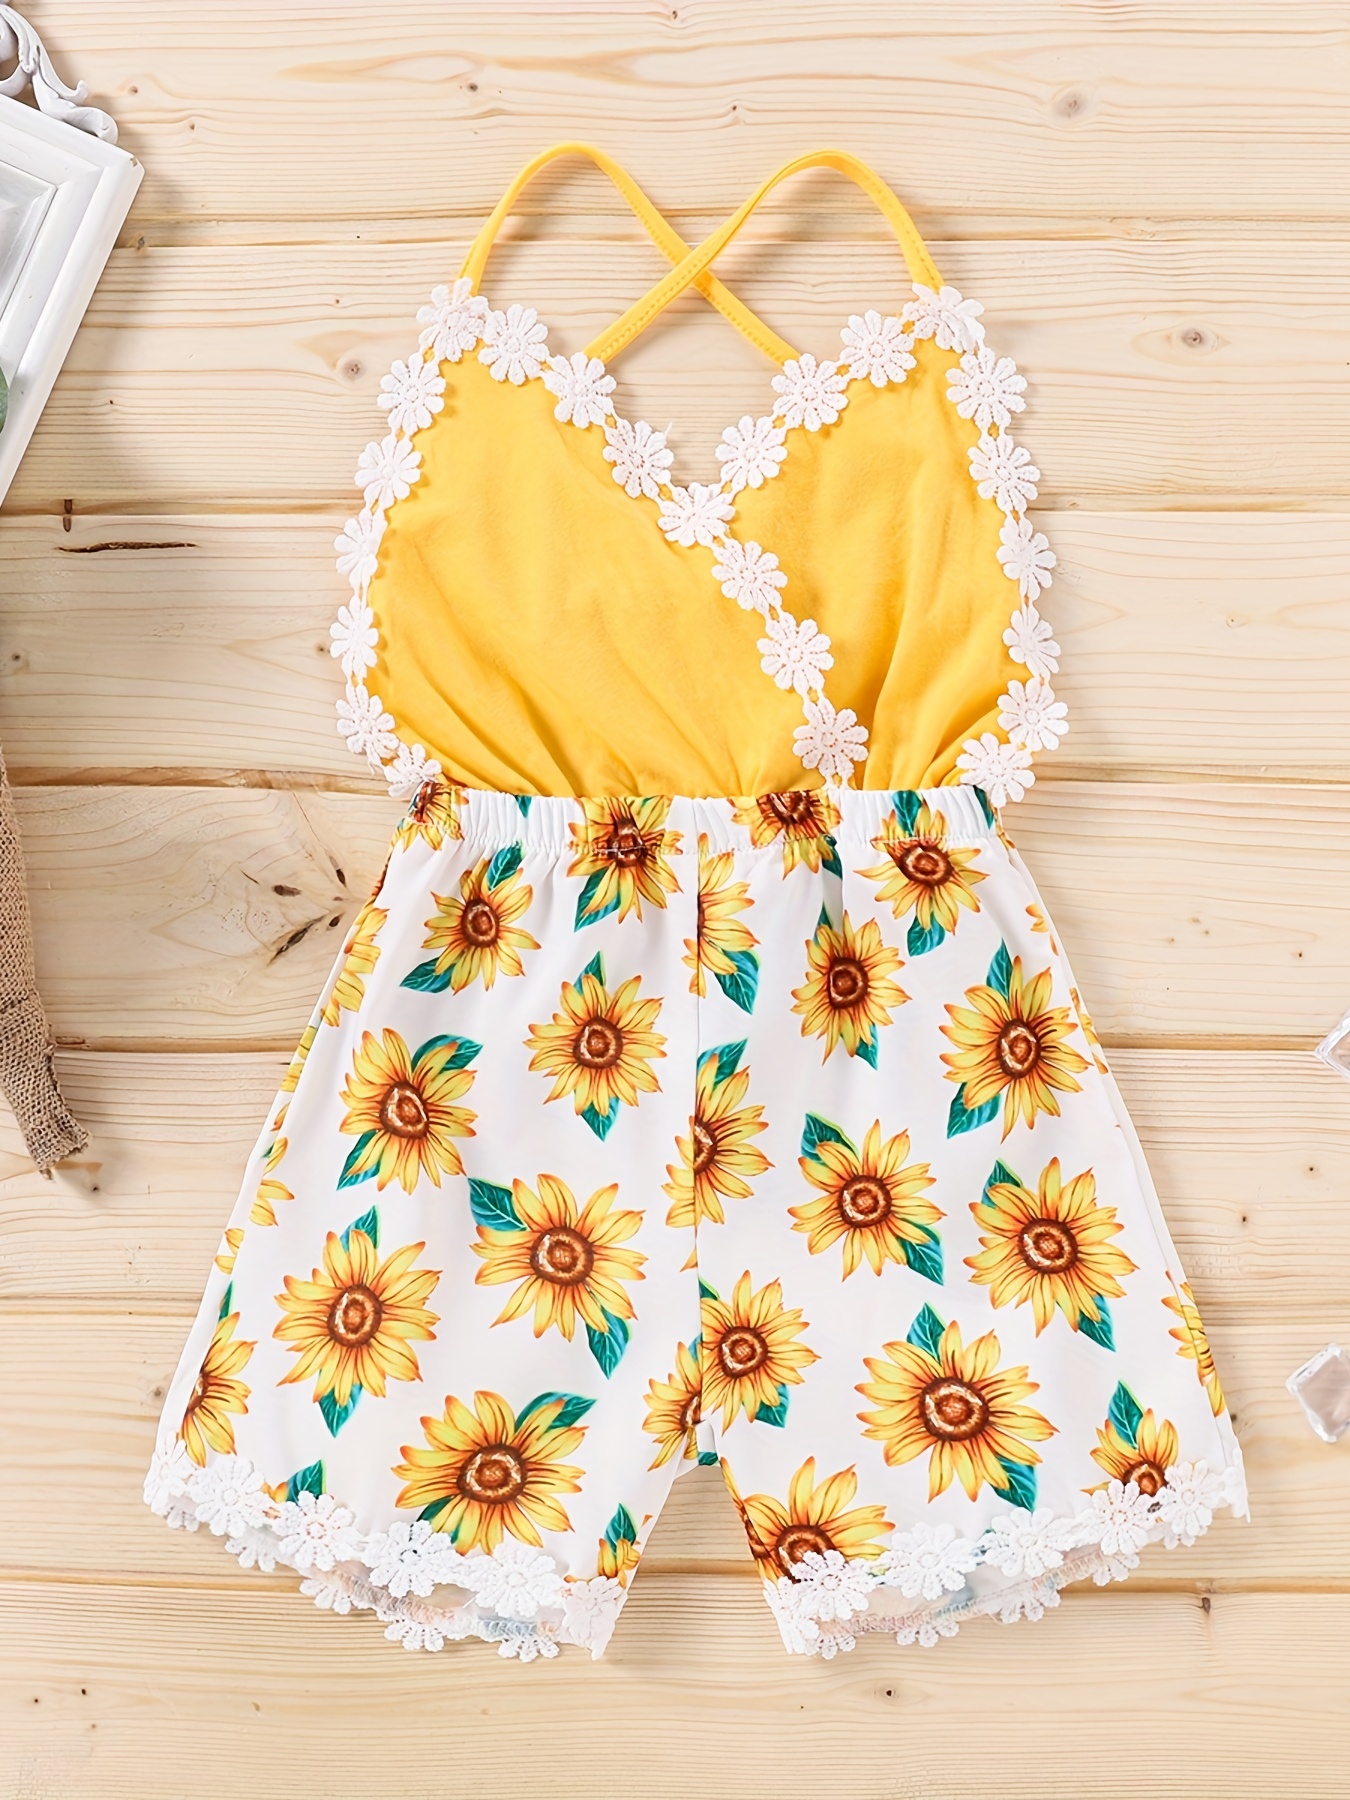 Deals On Summer Baby Girls Outfit With Lace Trim